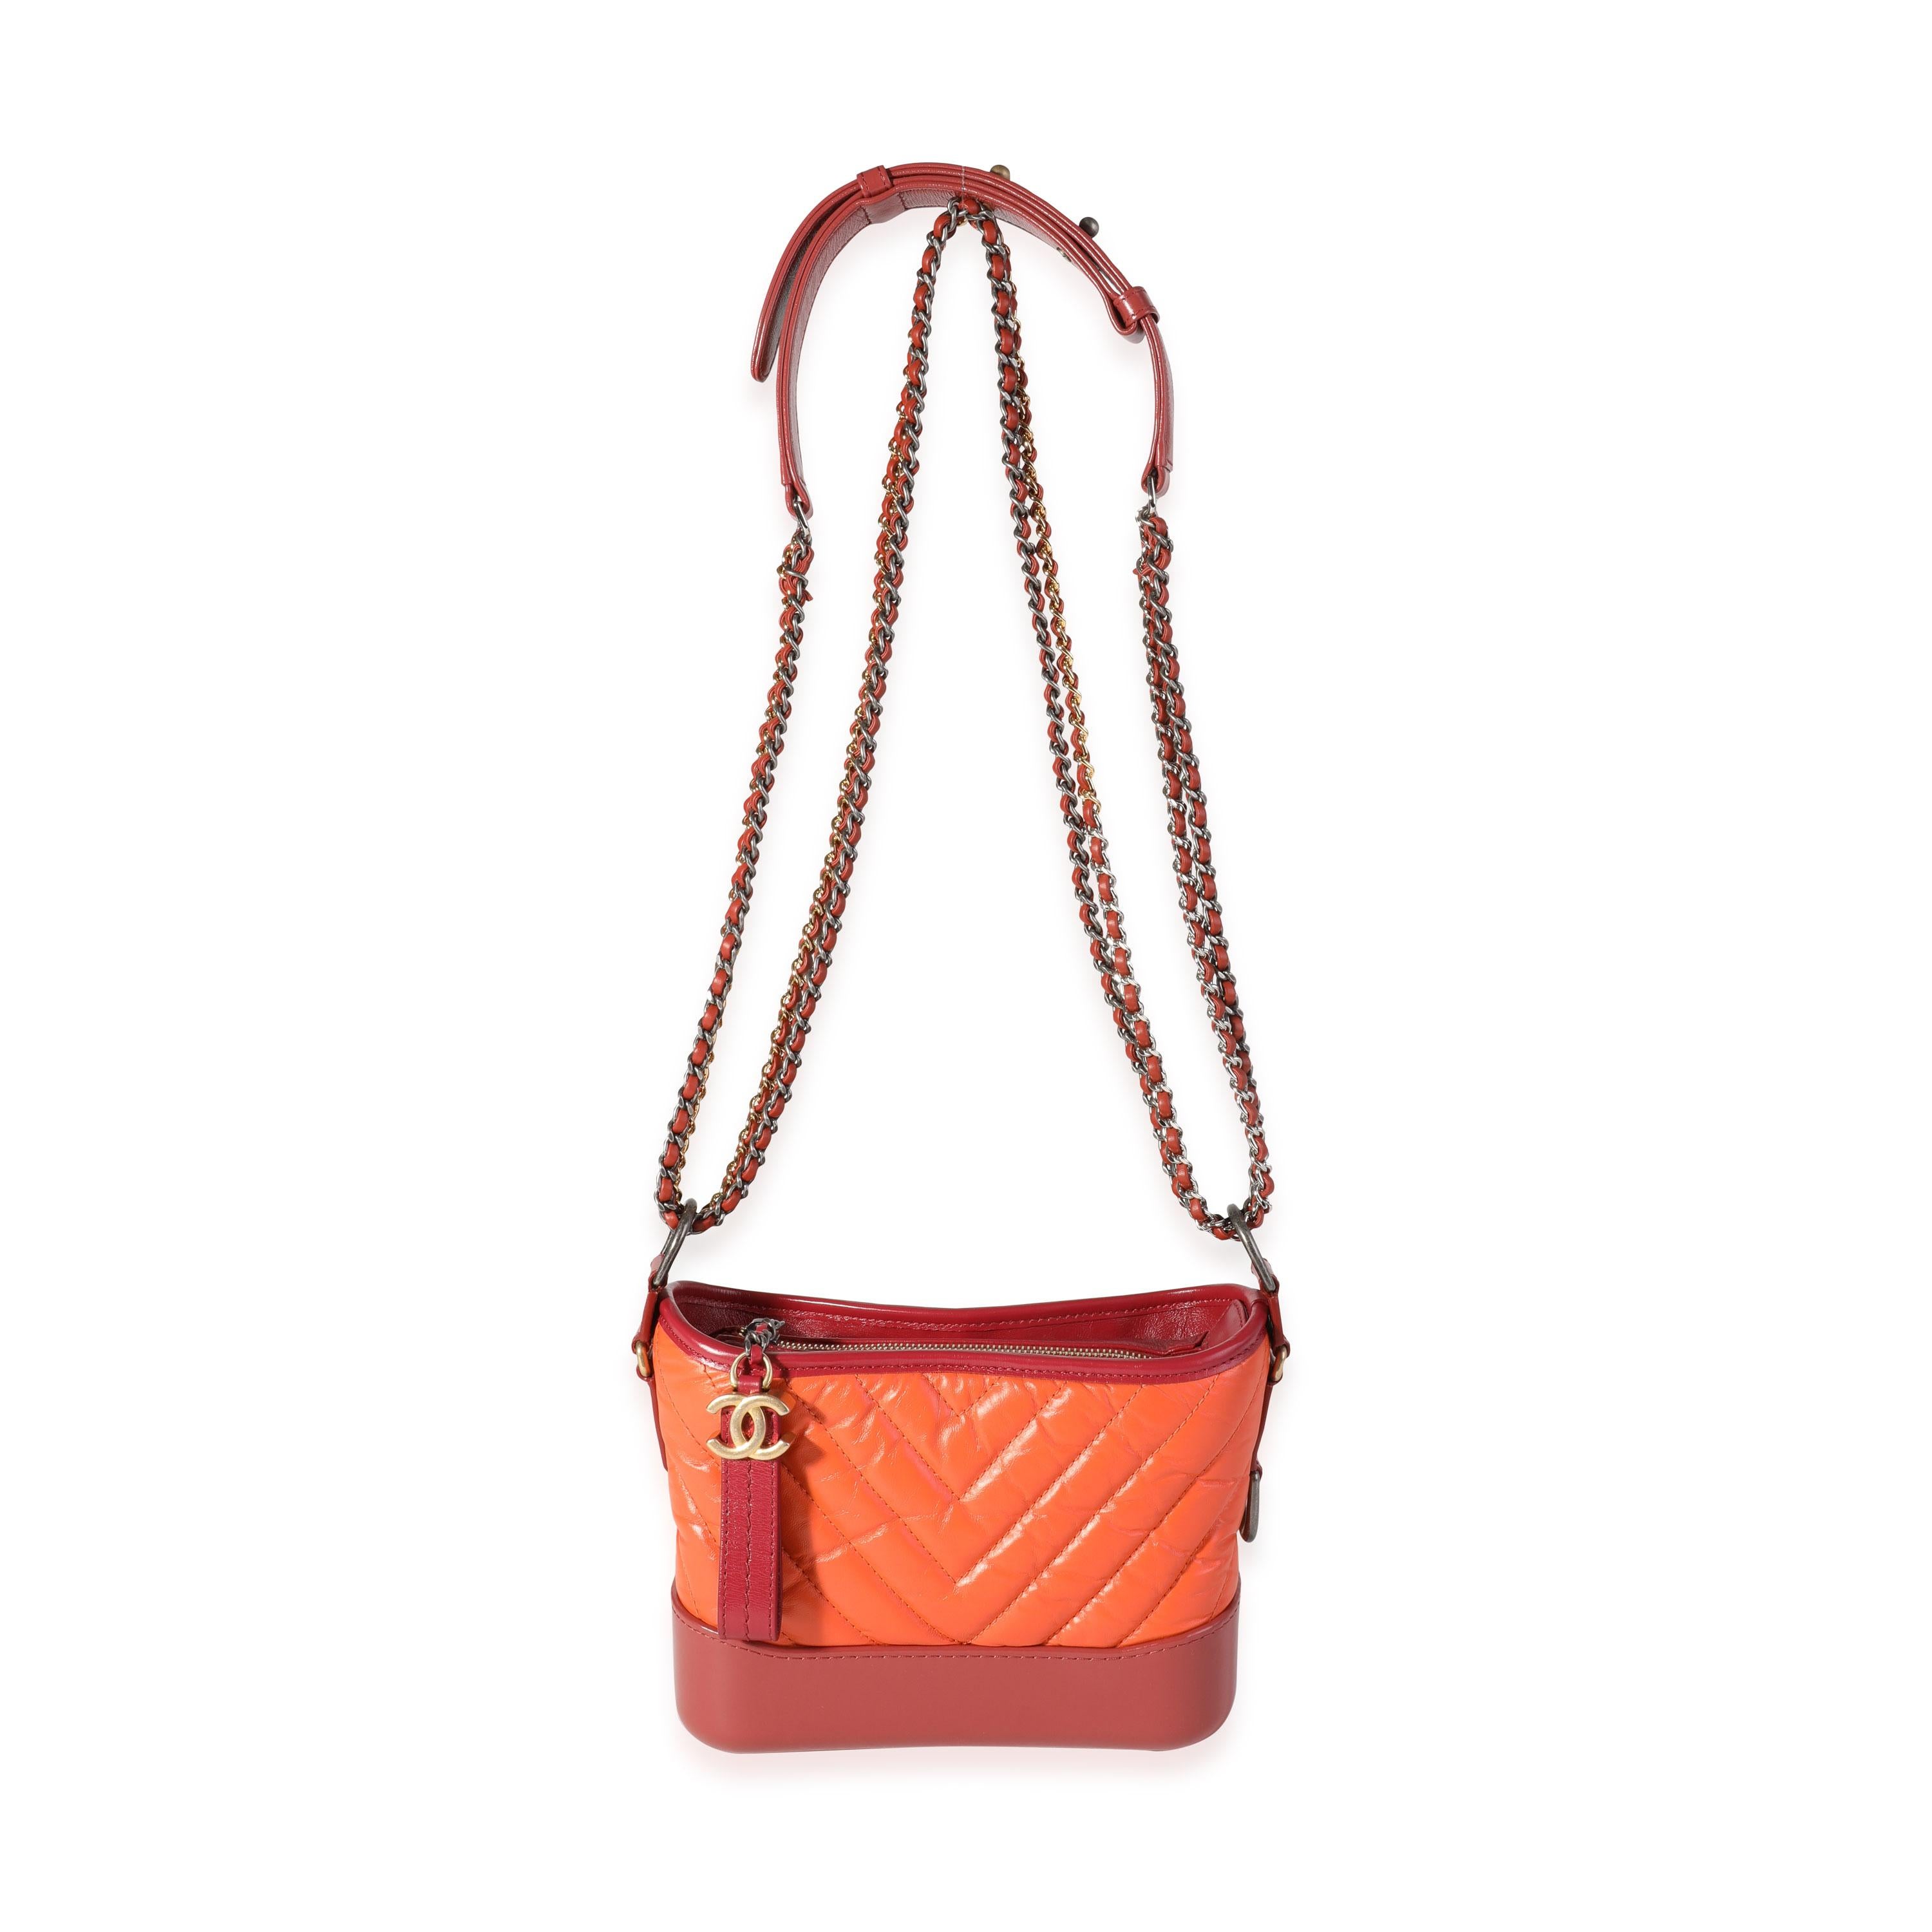 Listing Title: Chanel Orange & Red Aged Calfskin Chevron Quilted Small Gabrielle Hobo
SKU: 118096
MSRP: 5000.00
Condition: Pre-owned (3000)
Handbag Condition: Excellent
Condition Comments: Excellent Condition. Light scuffing to leather. No other